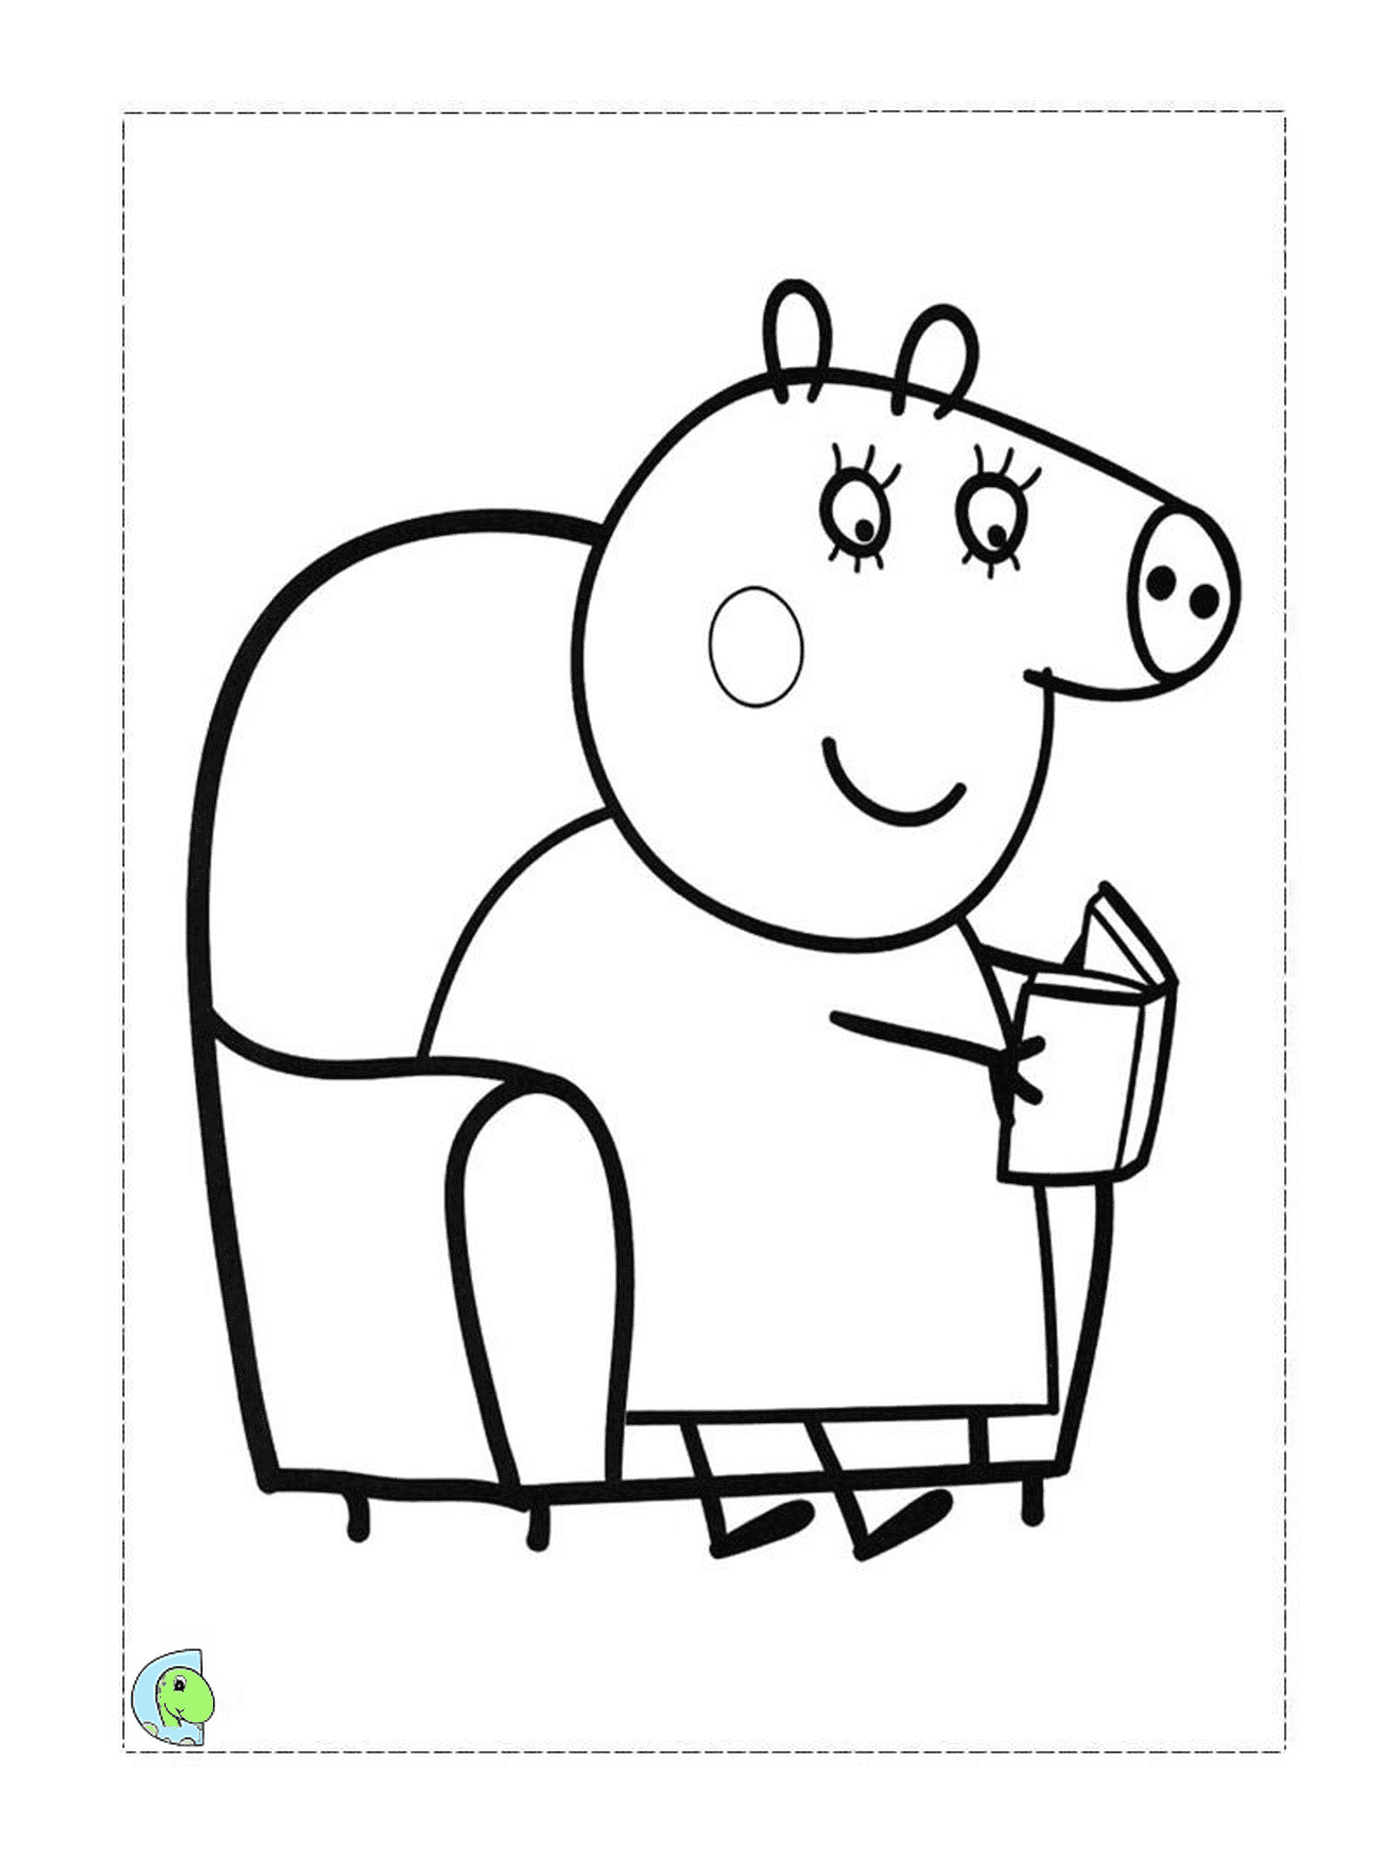  A pig sitting on a chair holding a book 